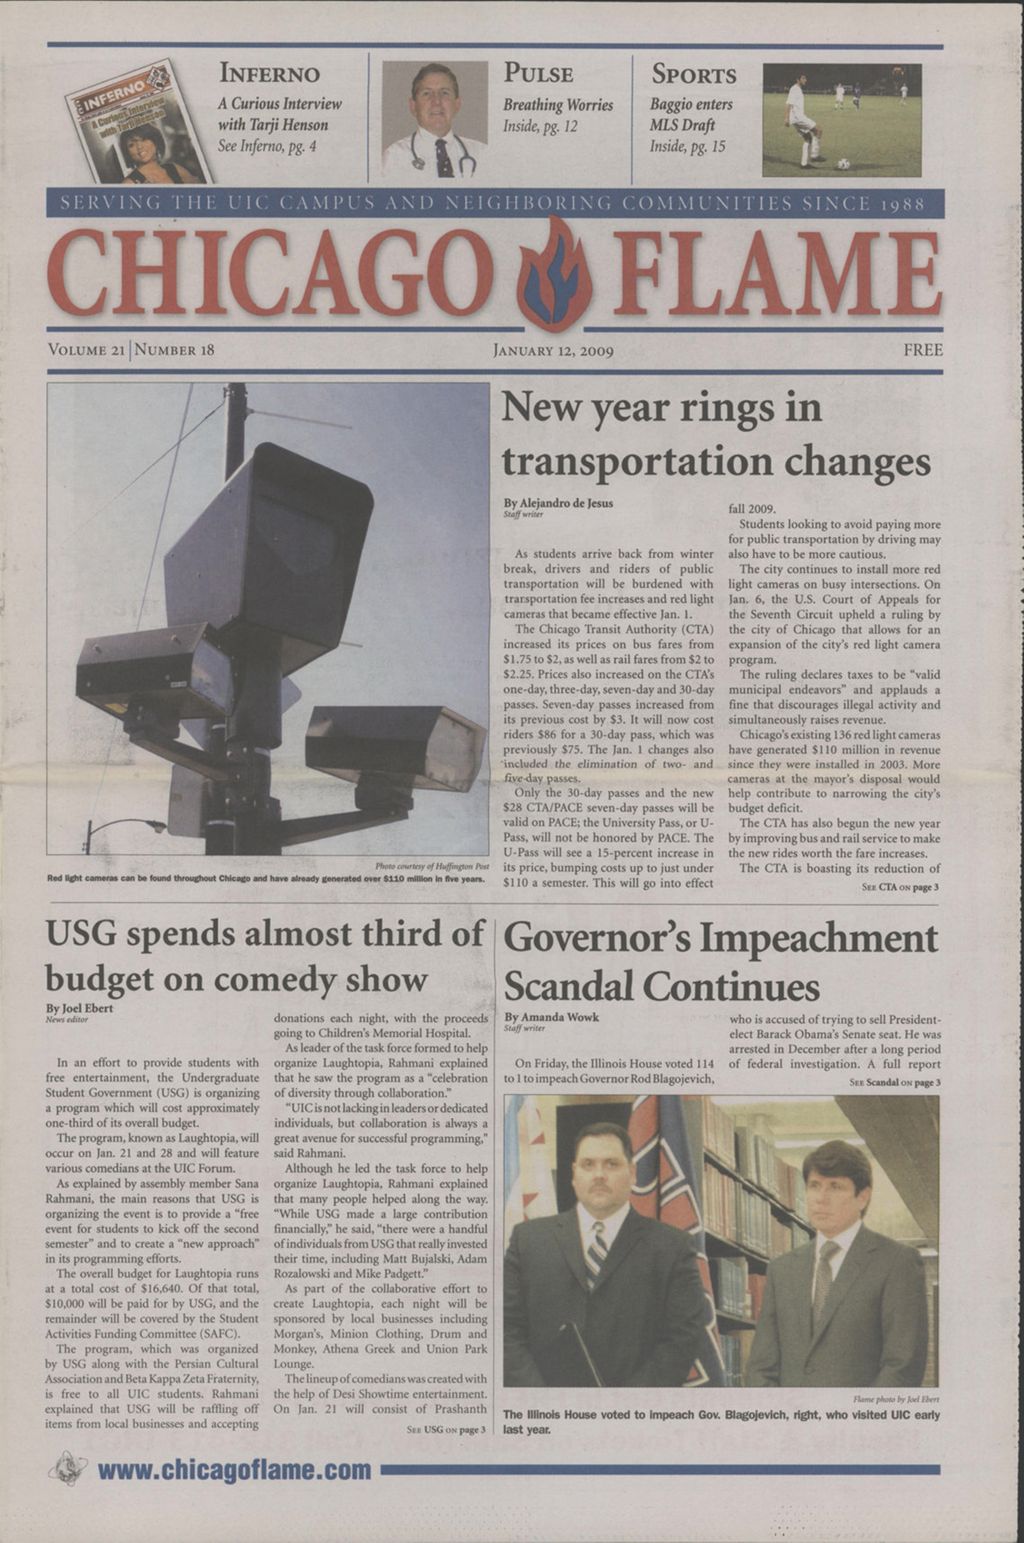 Miniature of Chicago Flame (January 12, 2009)